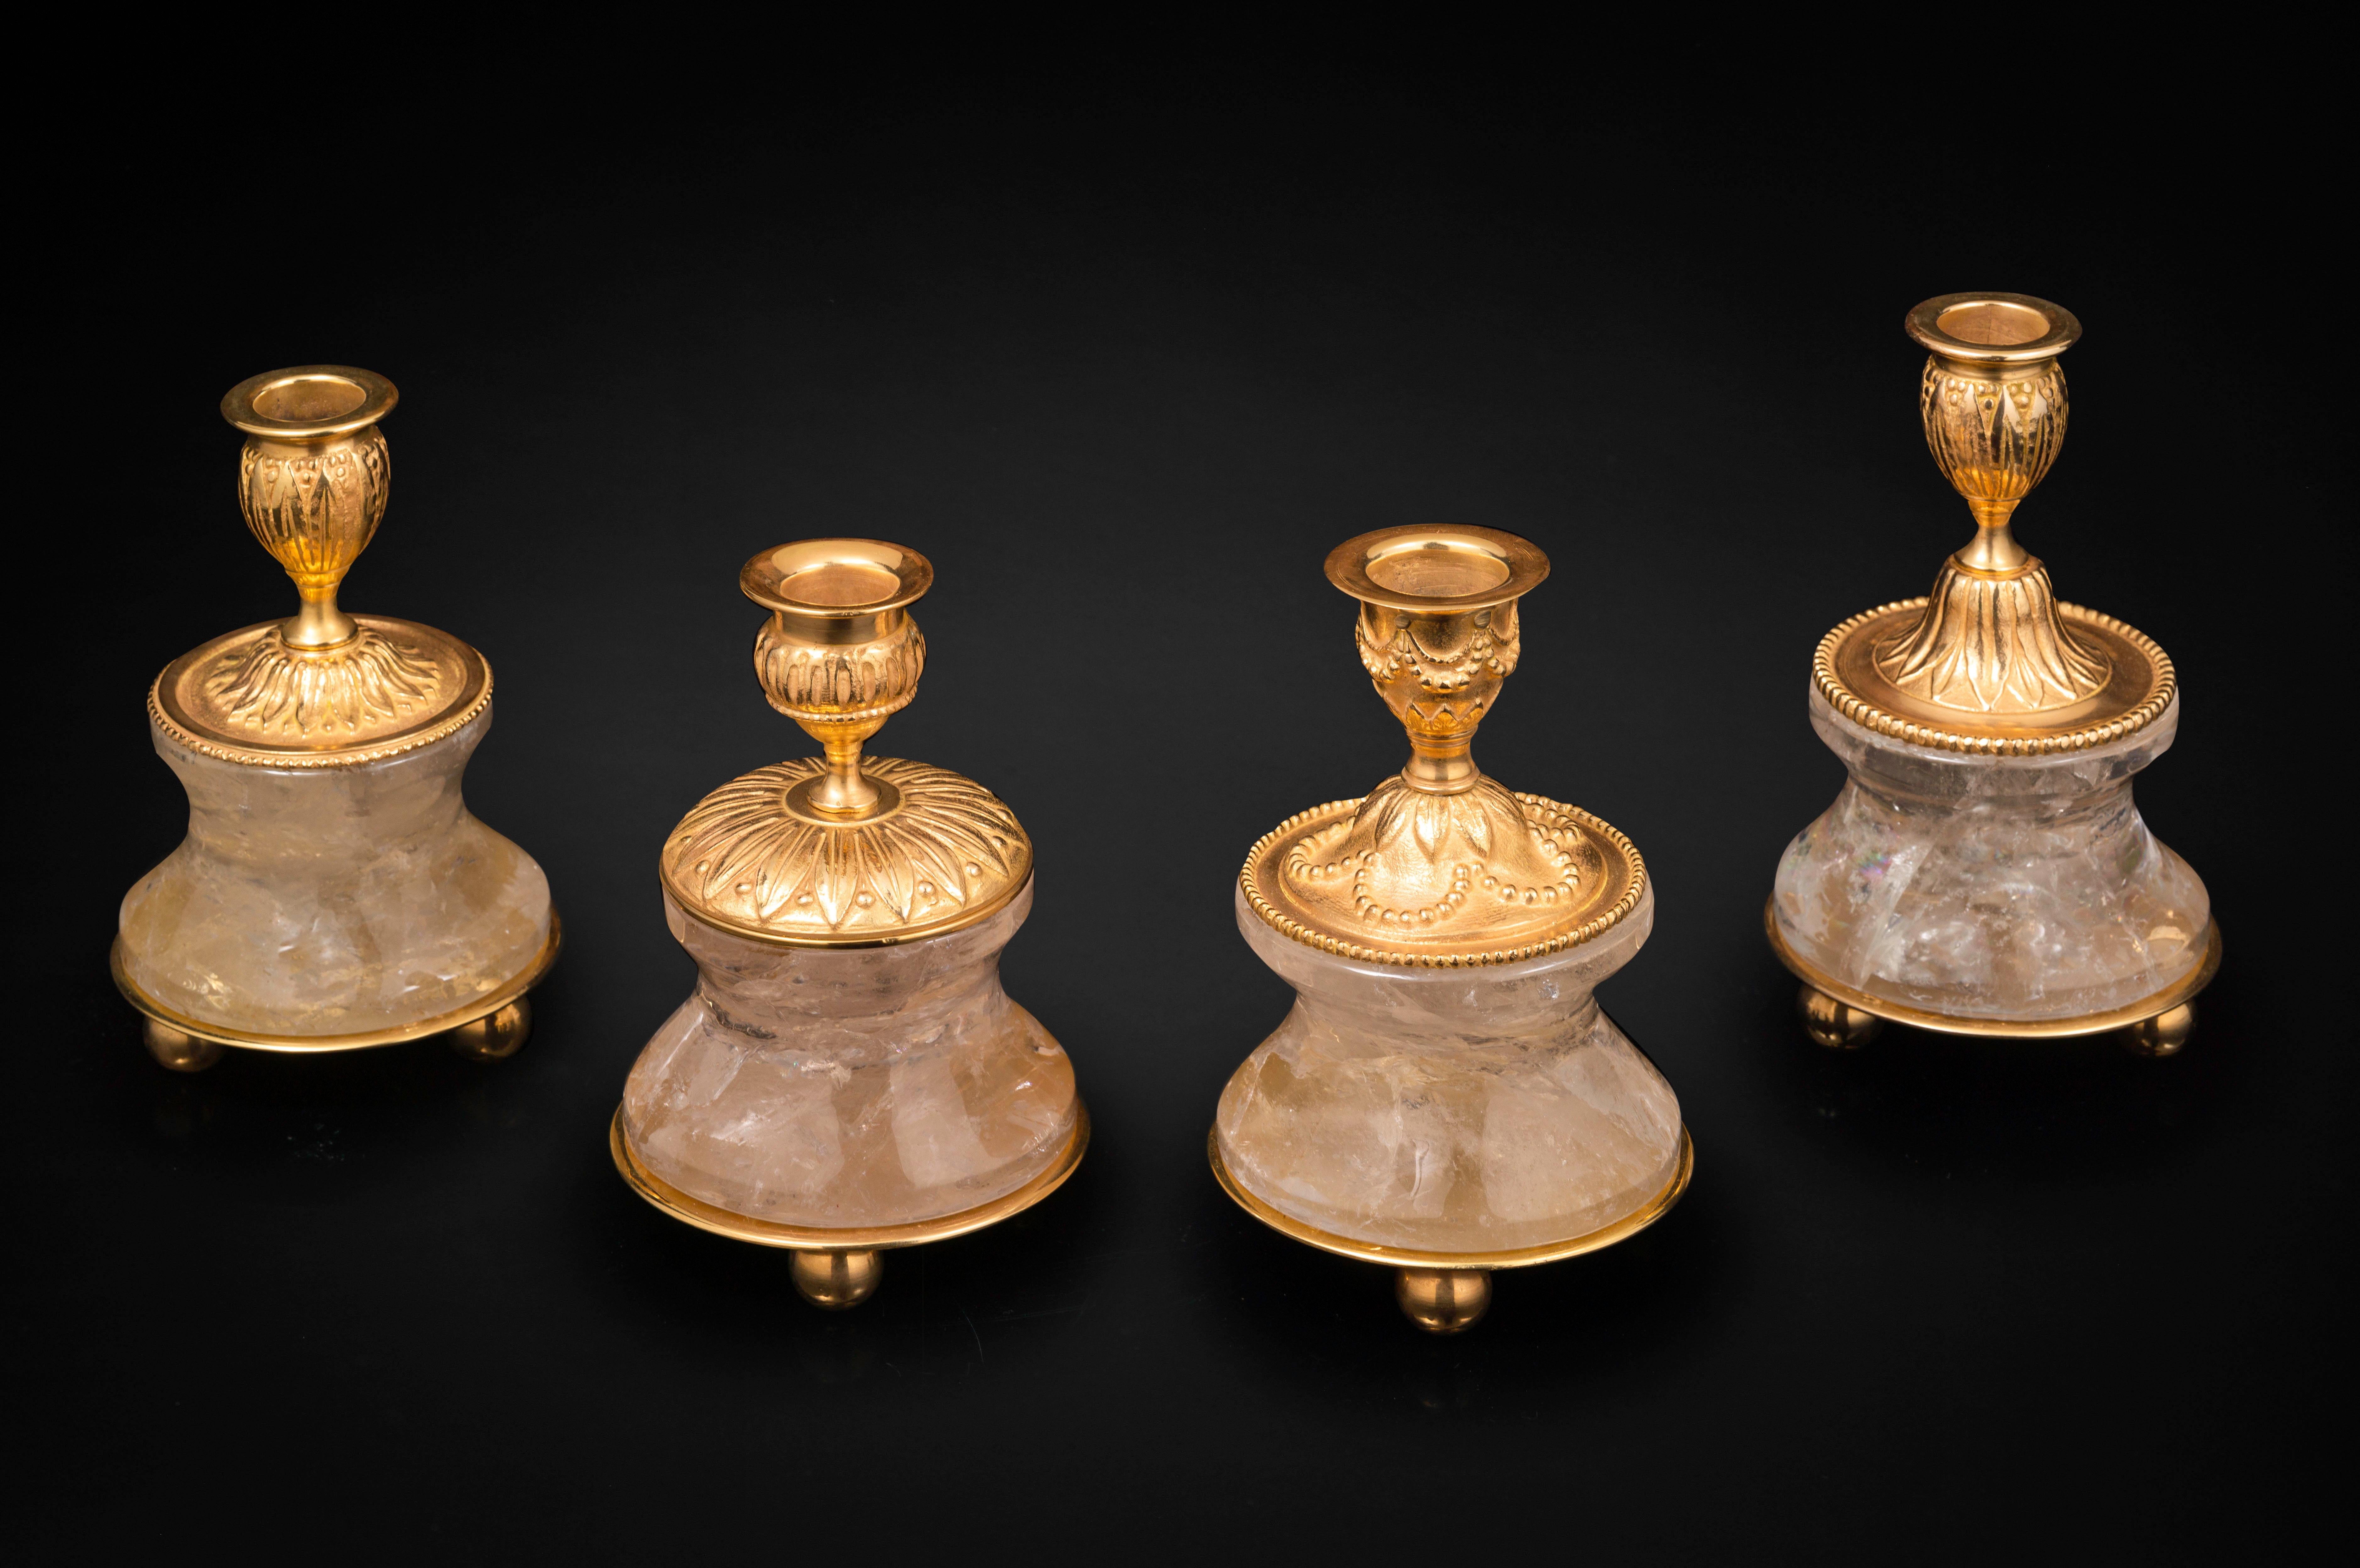 Pair of Rock Crystal and Gilt-Bronze Lamps/Candlesticks Louis XVI Style For Sale 1